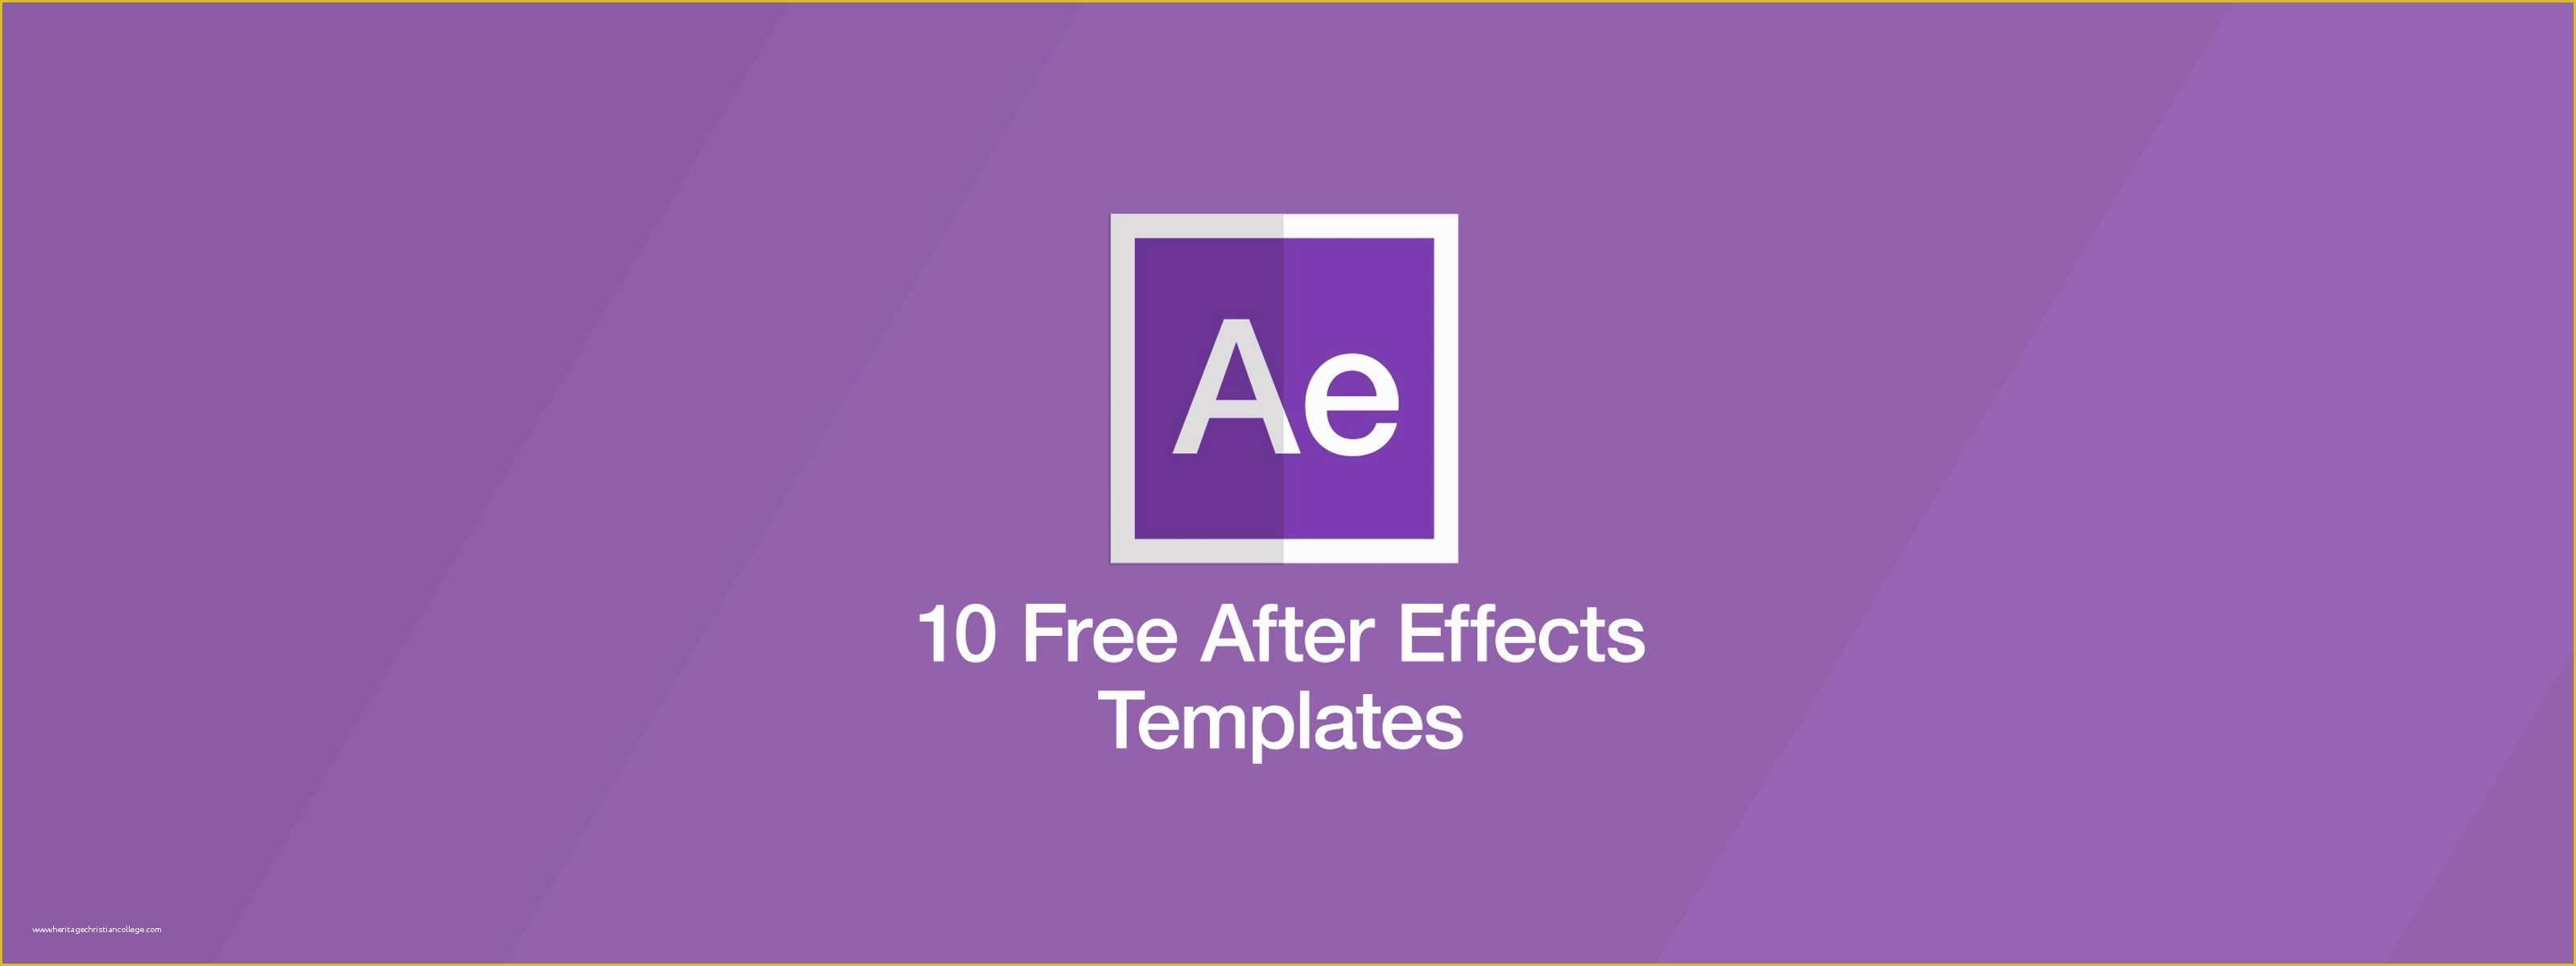 Ae Templates Free Download Of 10 Free after Effects Templates